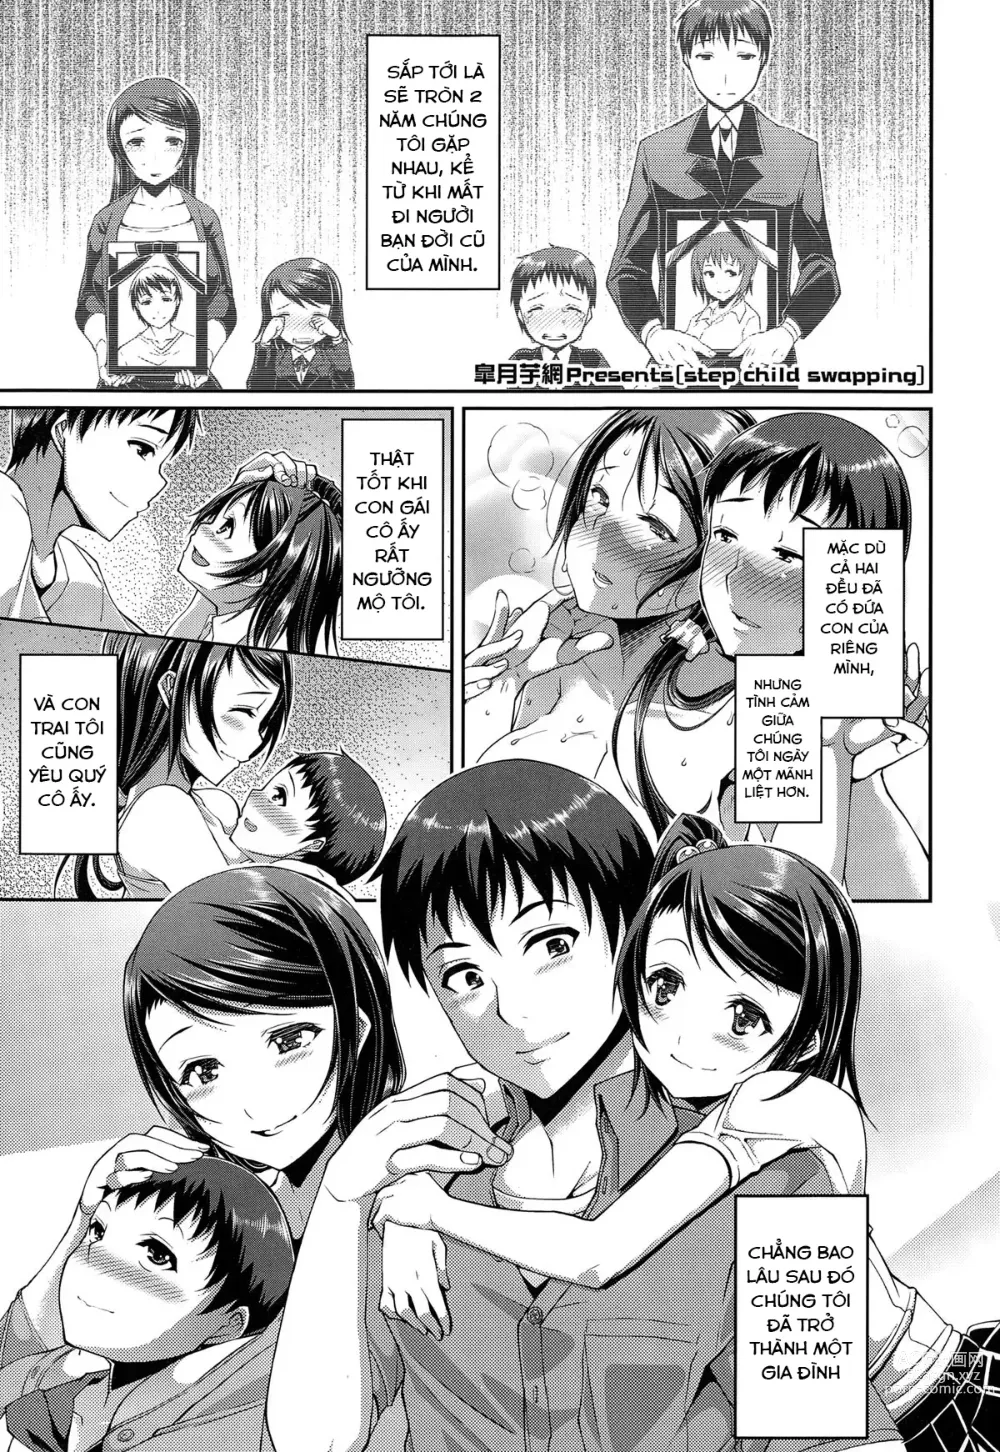 Page 1 of doujinshi Step Child Swapping